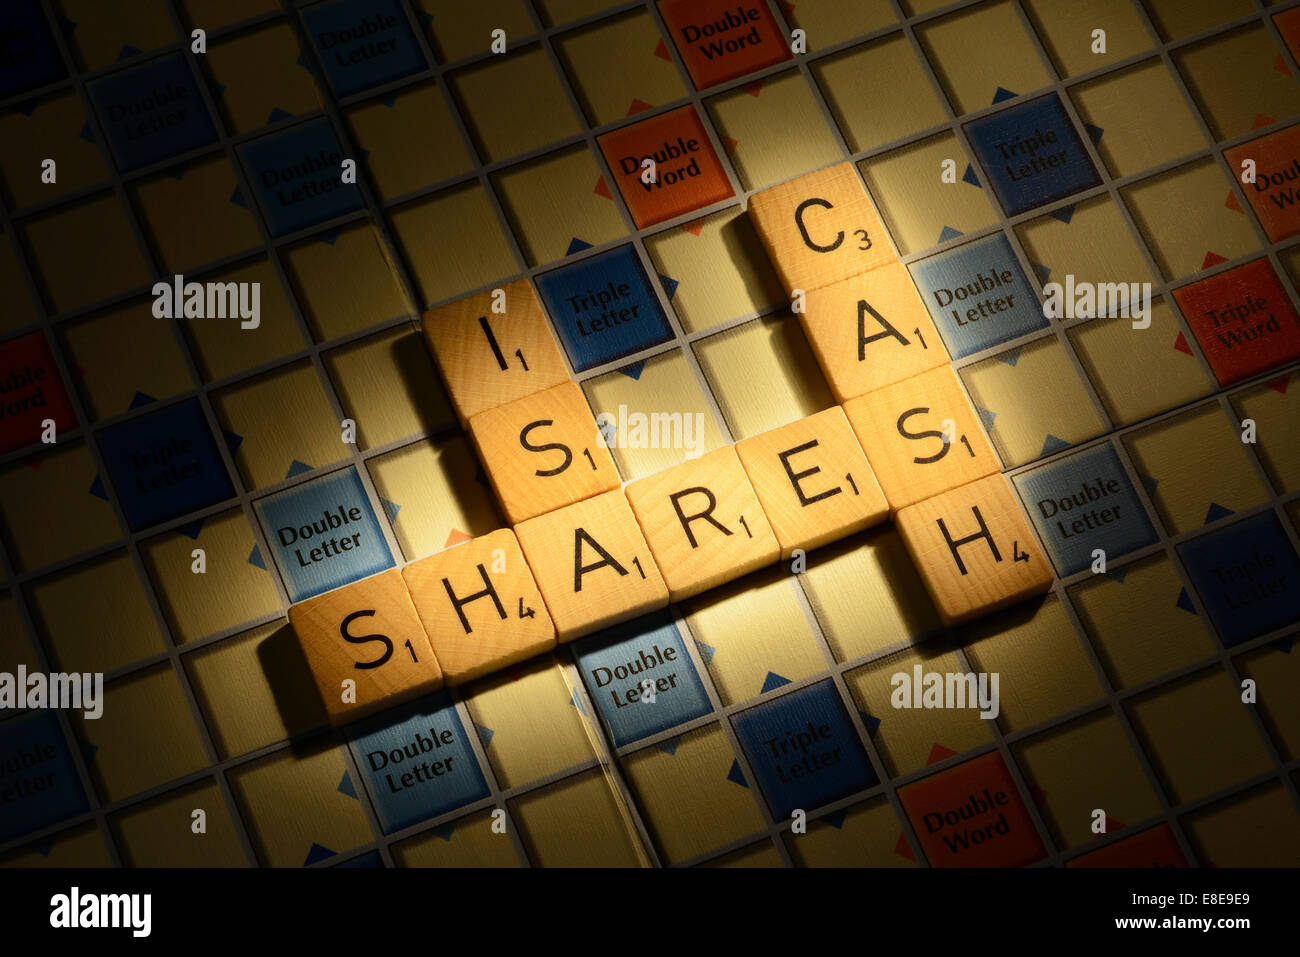 Scrabble board with the words Cash Shares ISA Stock Photo